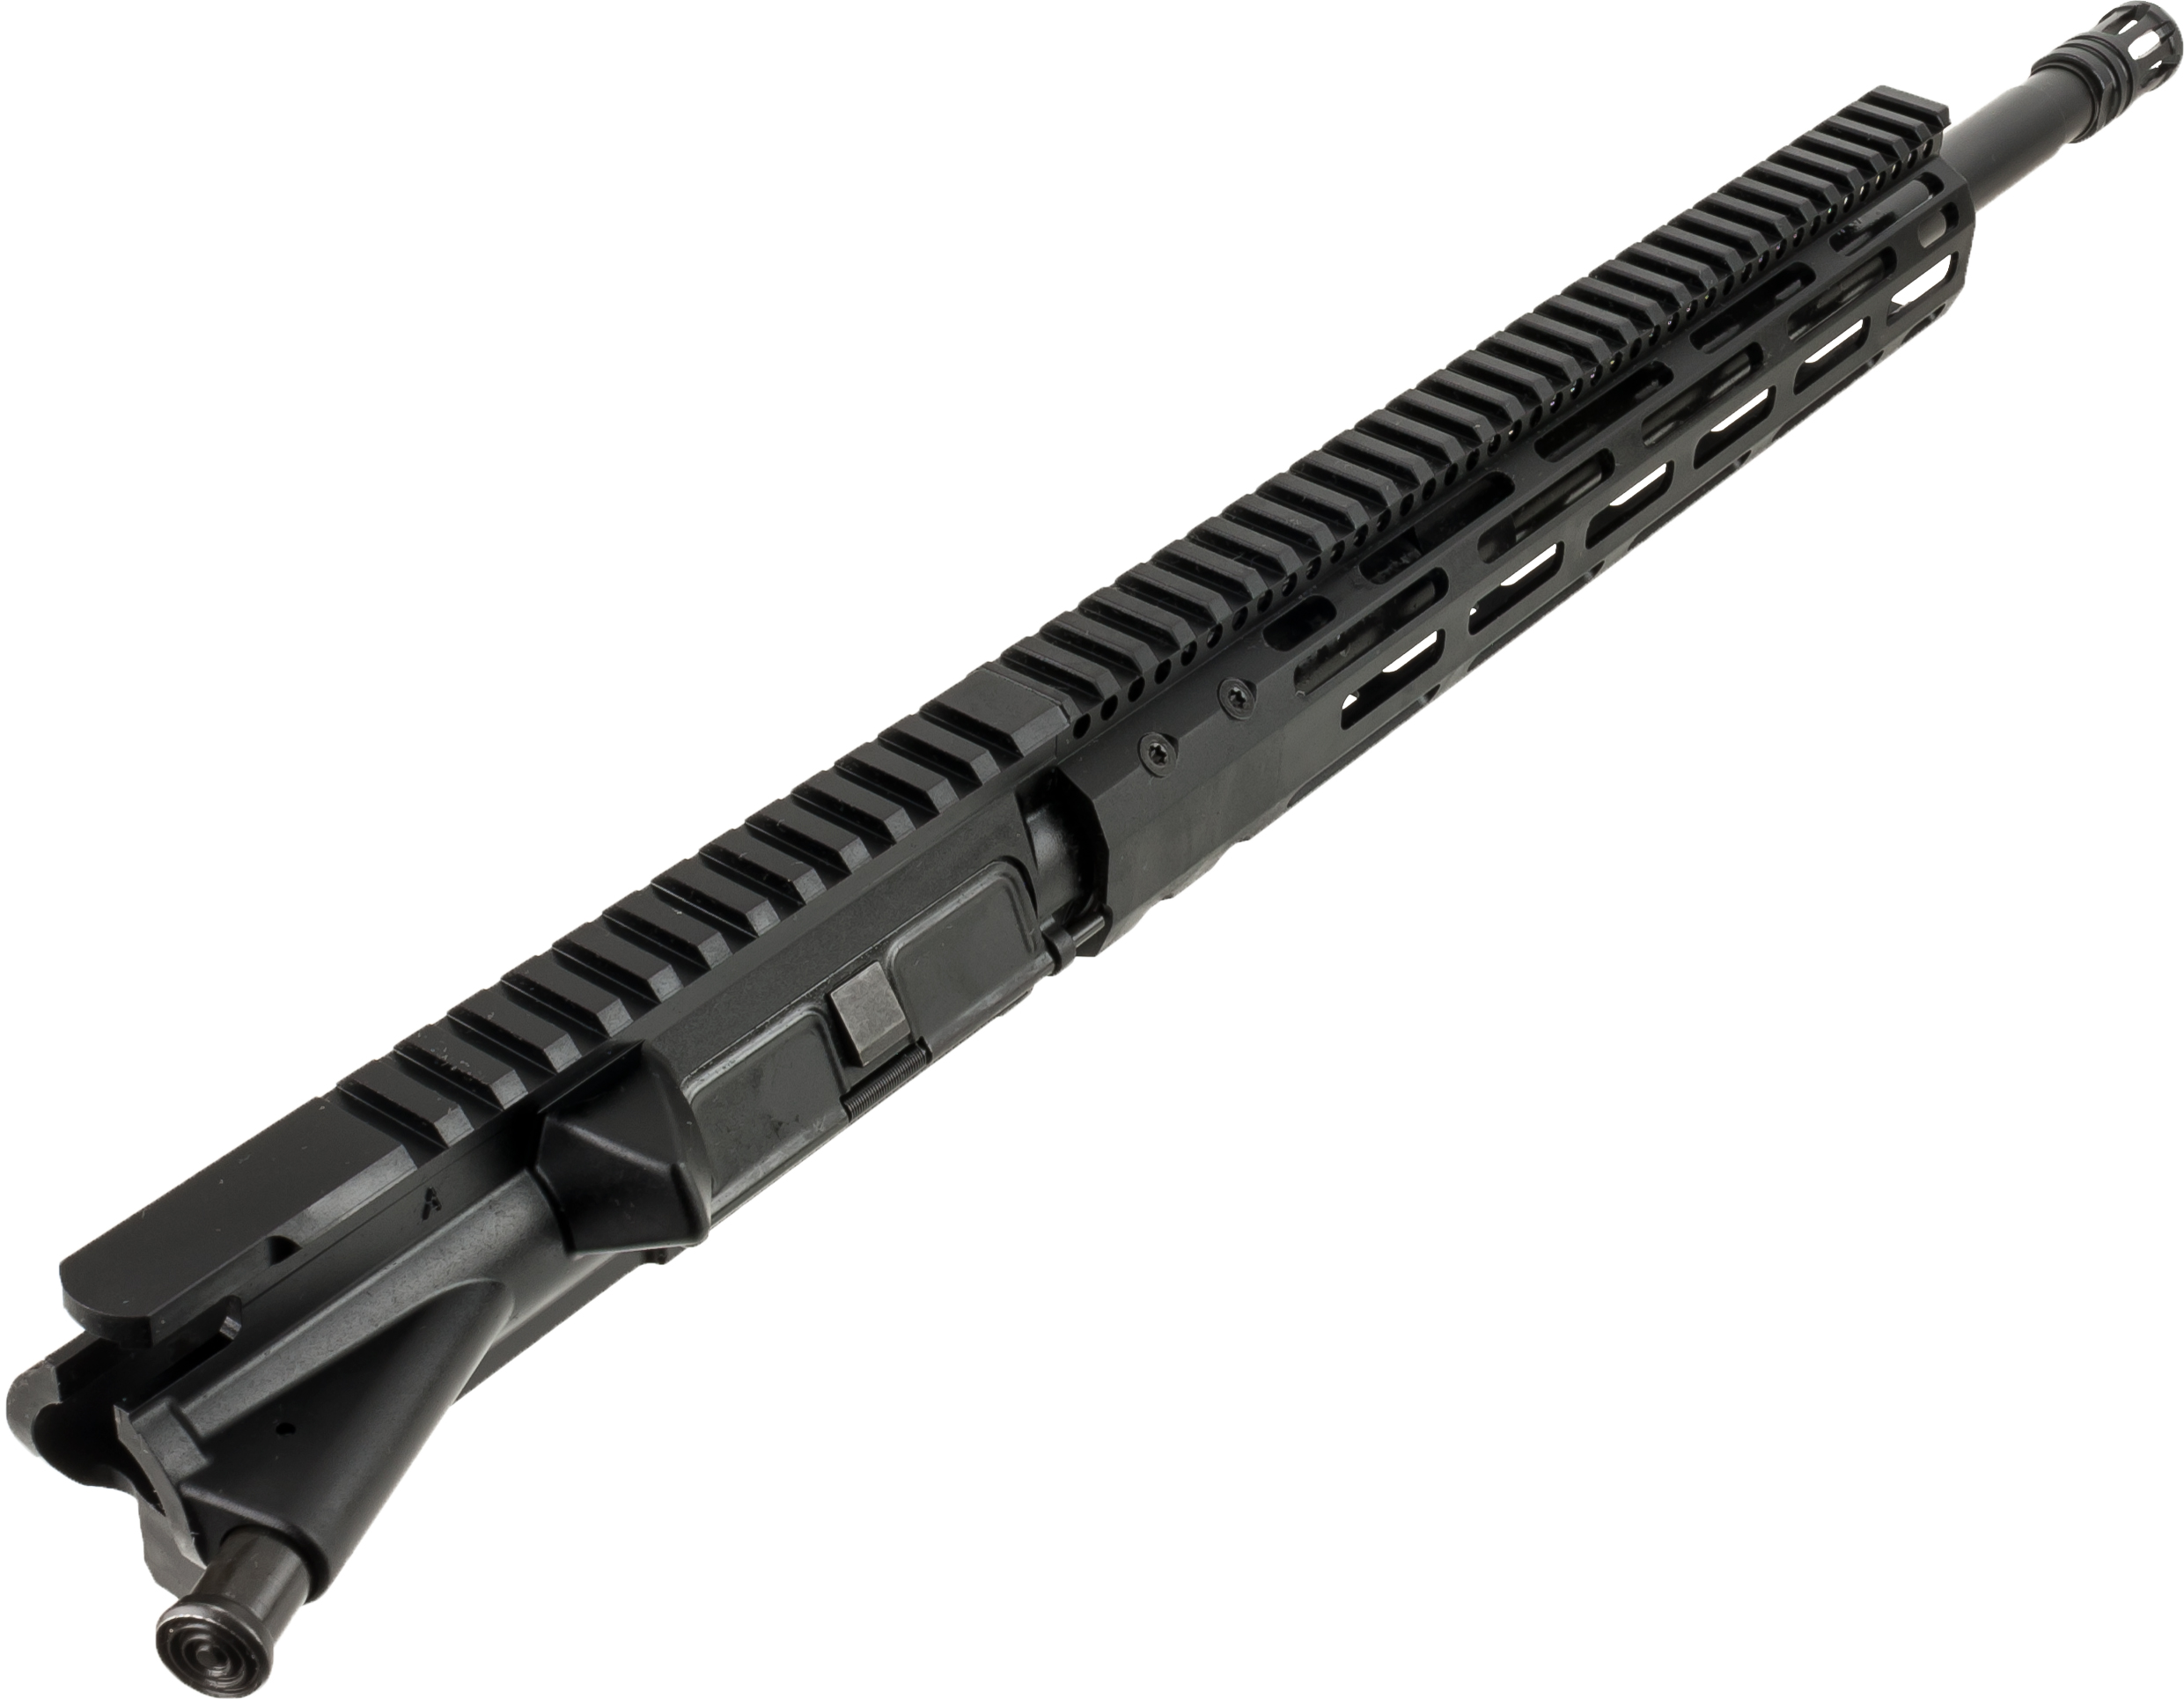 The Radical Firearms 300 AAC Blackout Upper Assembly is a flat top, law-enf...